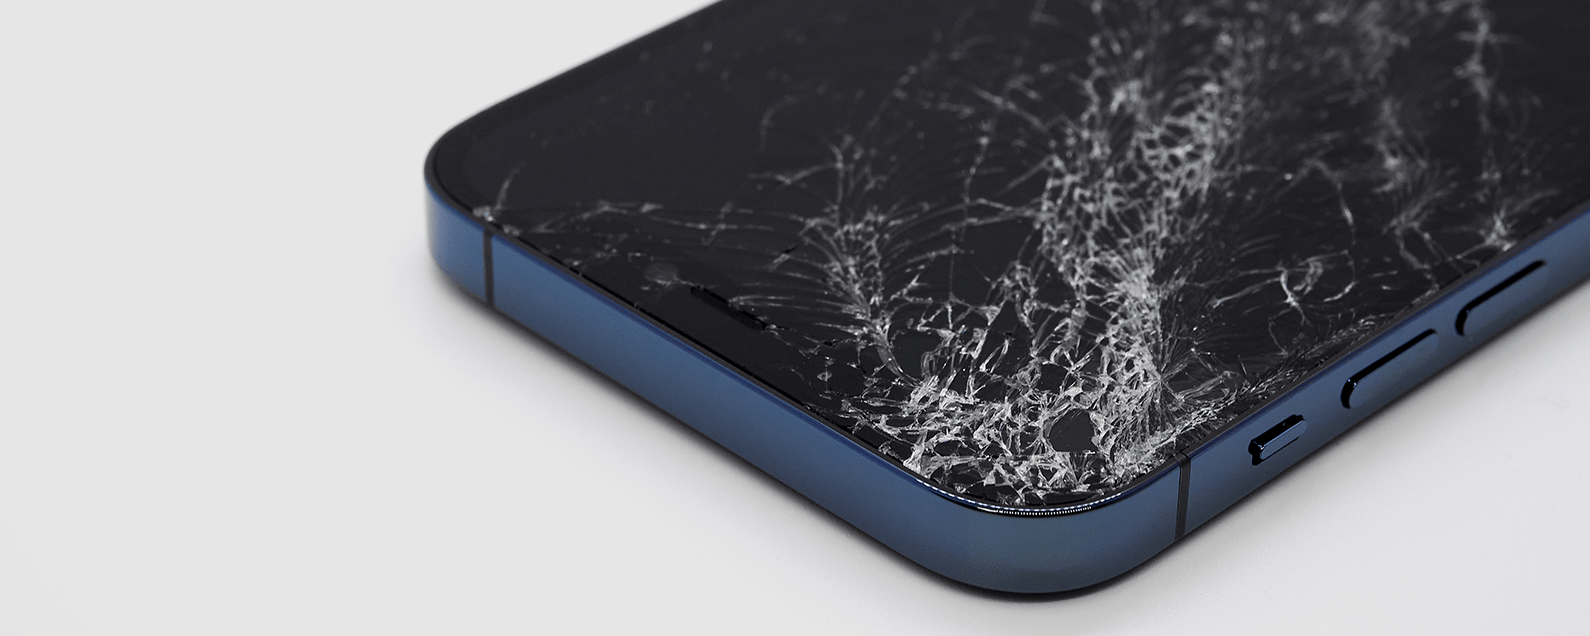 Is it Worth Repairing a Broken iPhone Display or Better to Buy a New One?